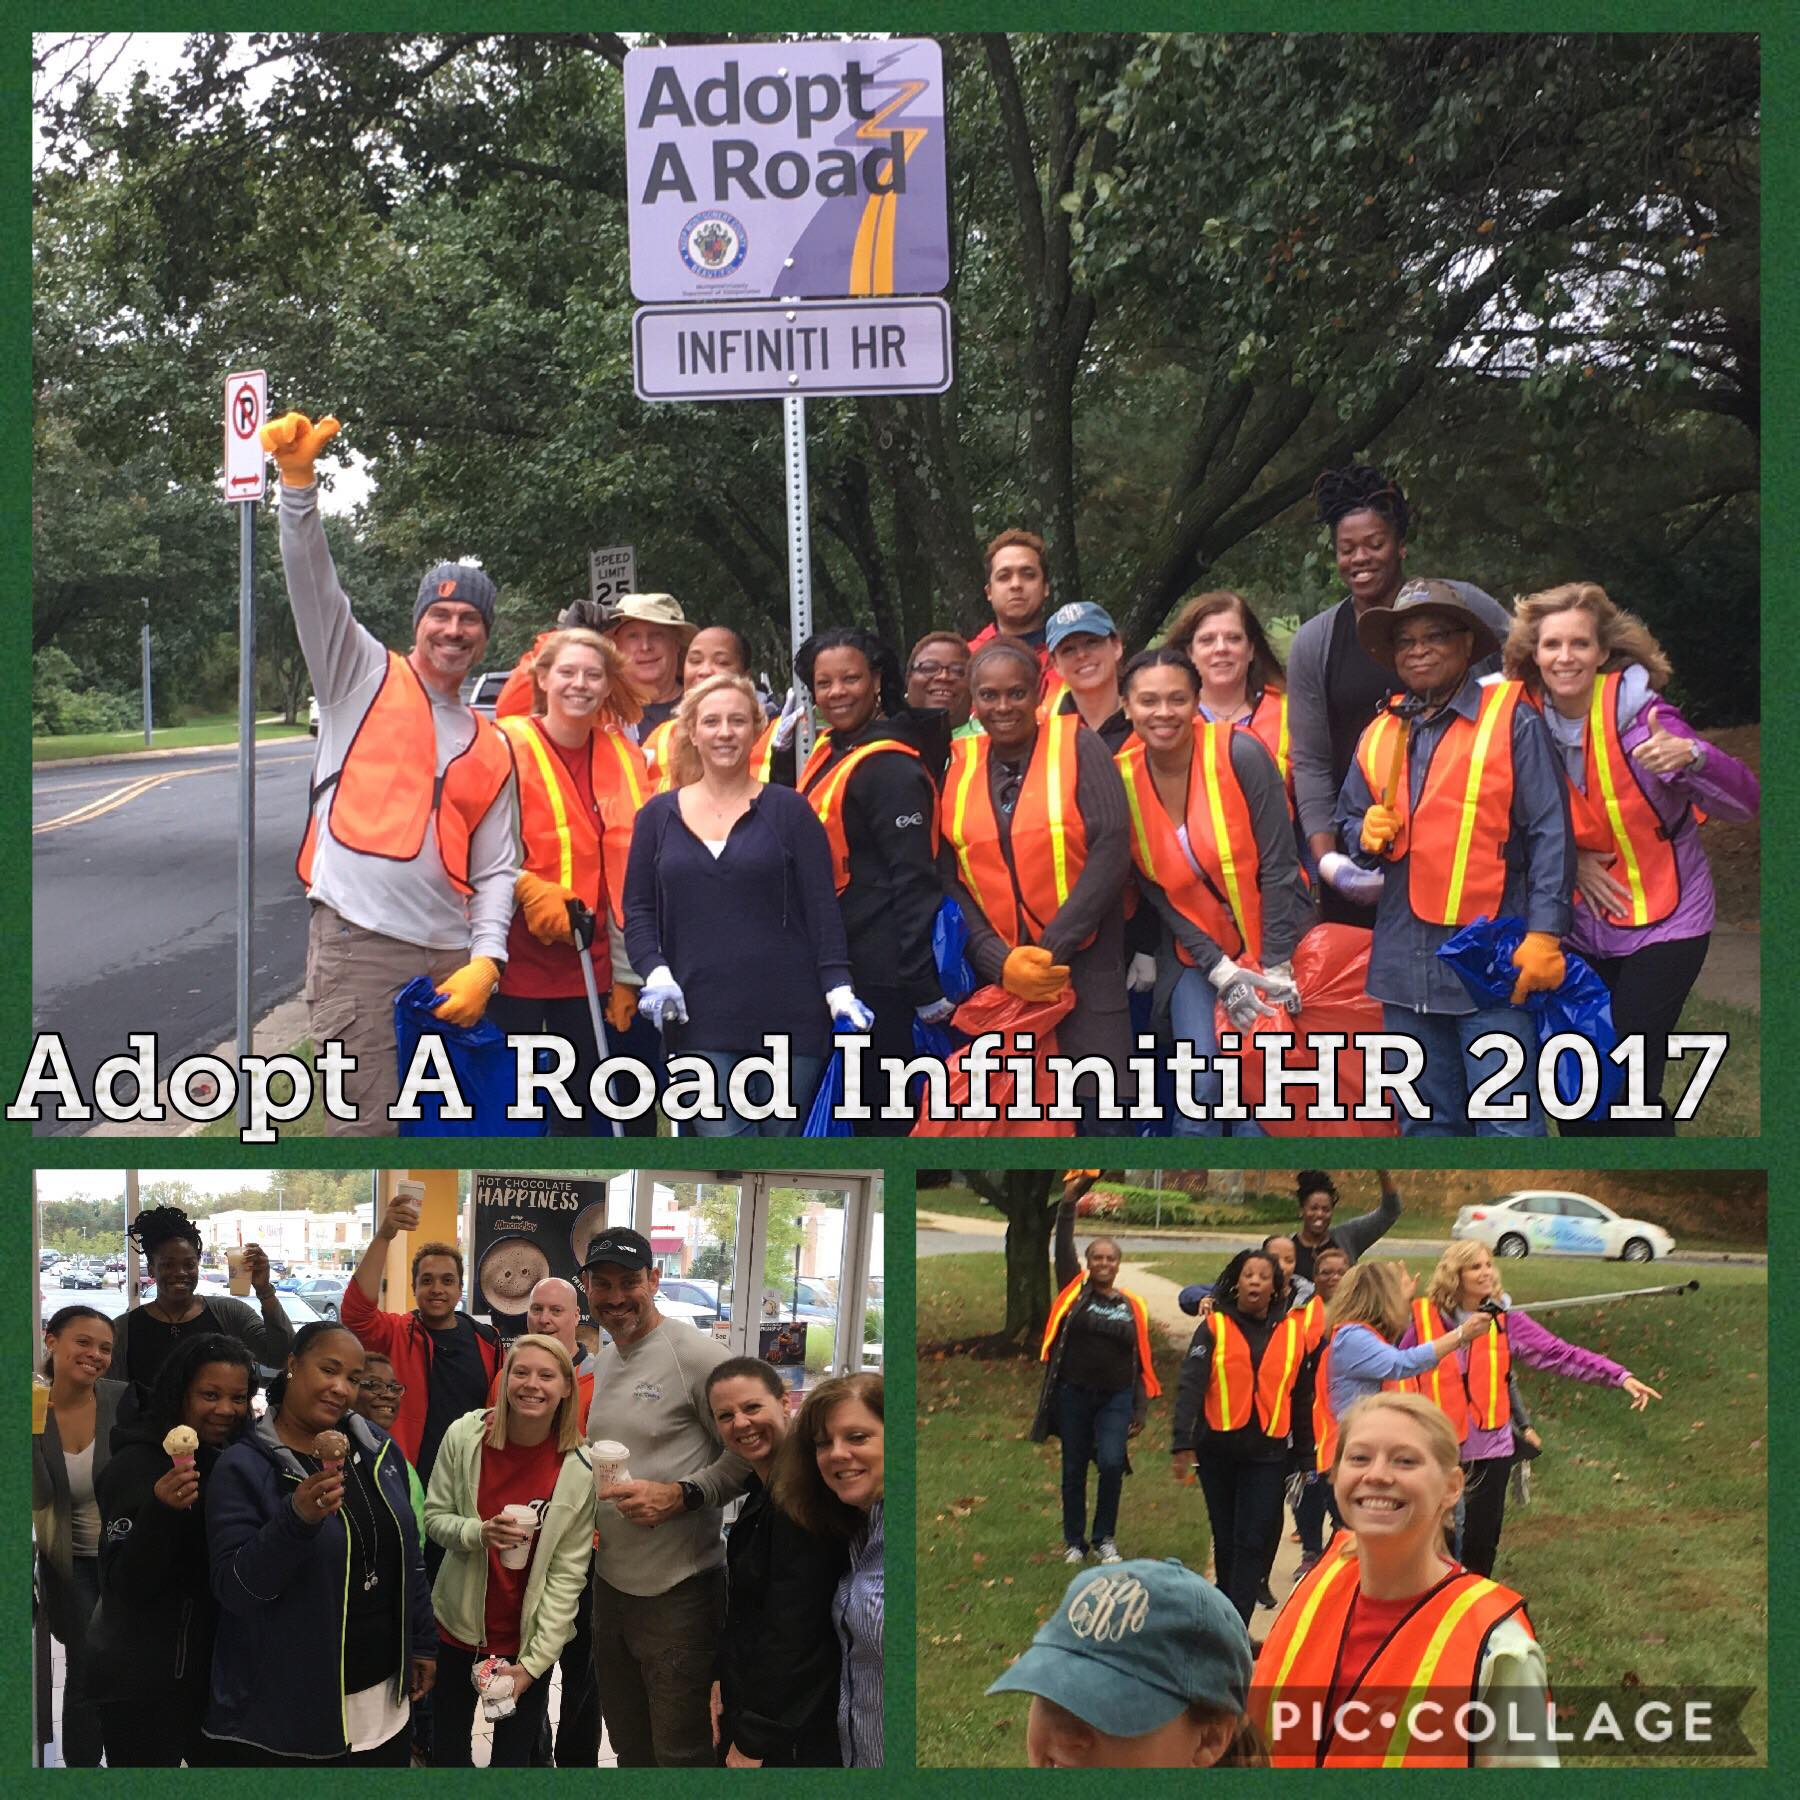 INFINITI Adopts a Road in Maryland